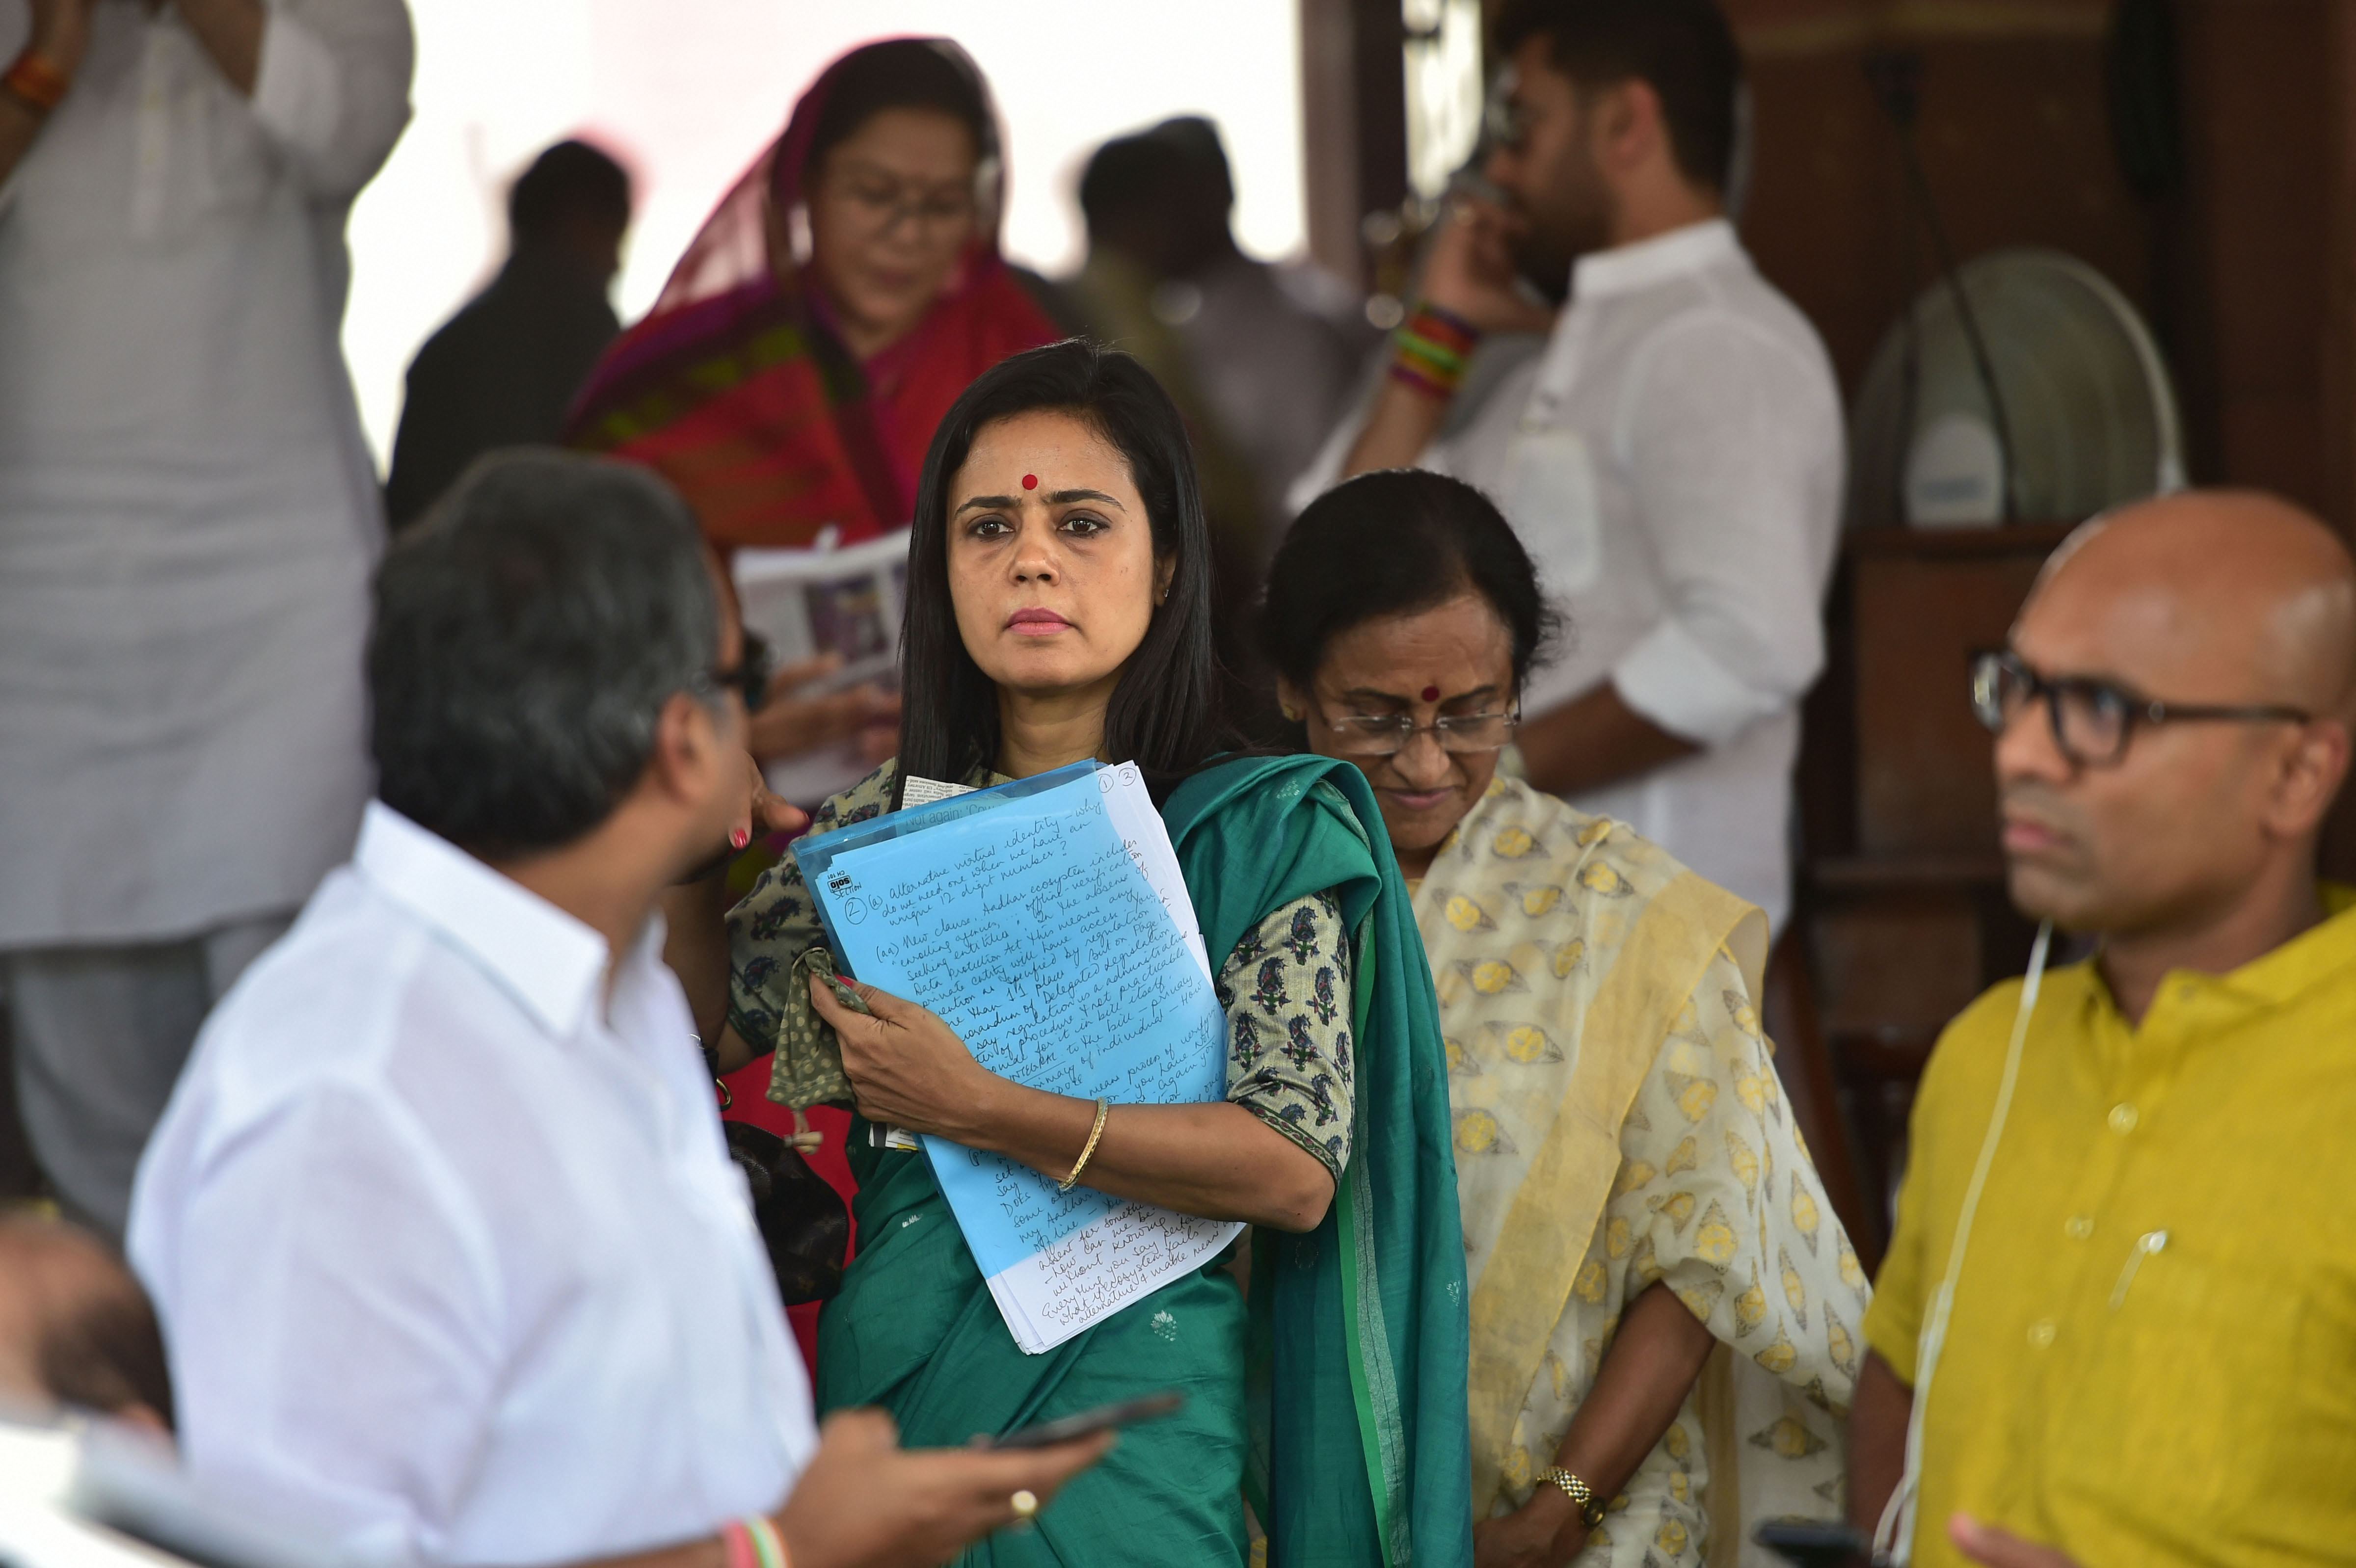 Trinamul Congress MP Mahua Moitra (in green sari) at Parliament House during the budget session, in New Delhi, on Tuesday, July 2, 2019.